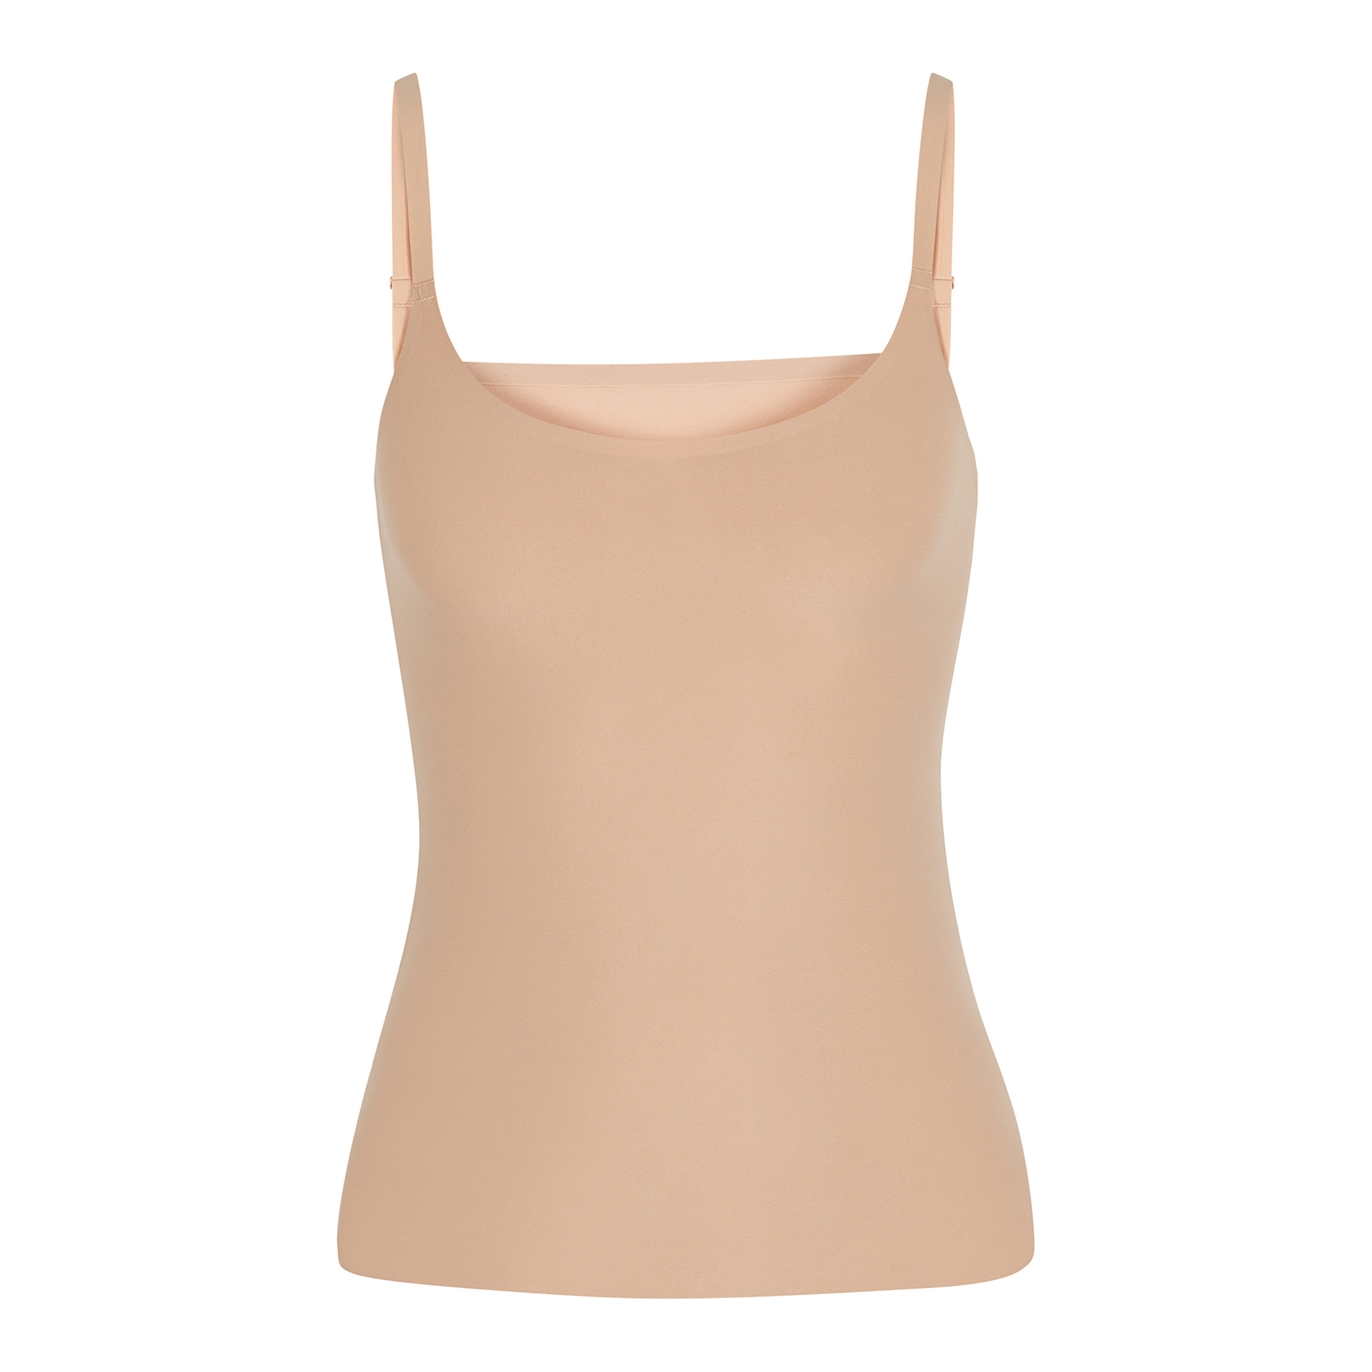 Chantelle Soft Stretch Nude Seamless Camisole Top - M/L